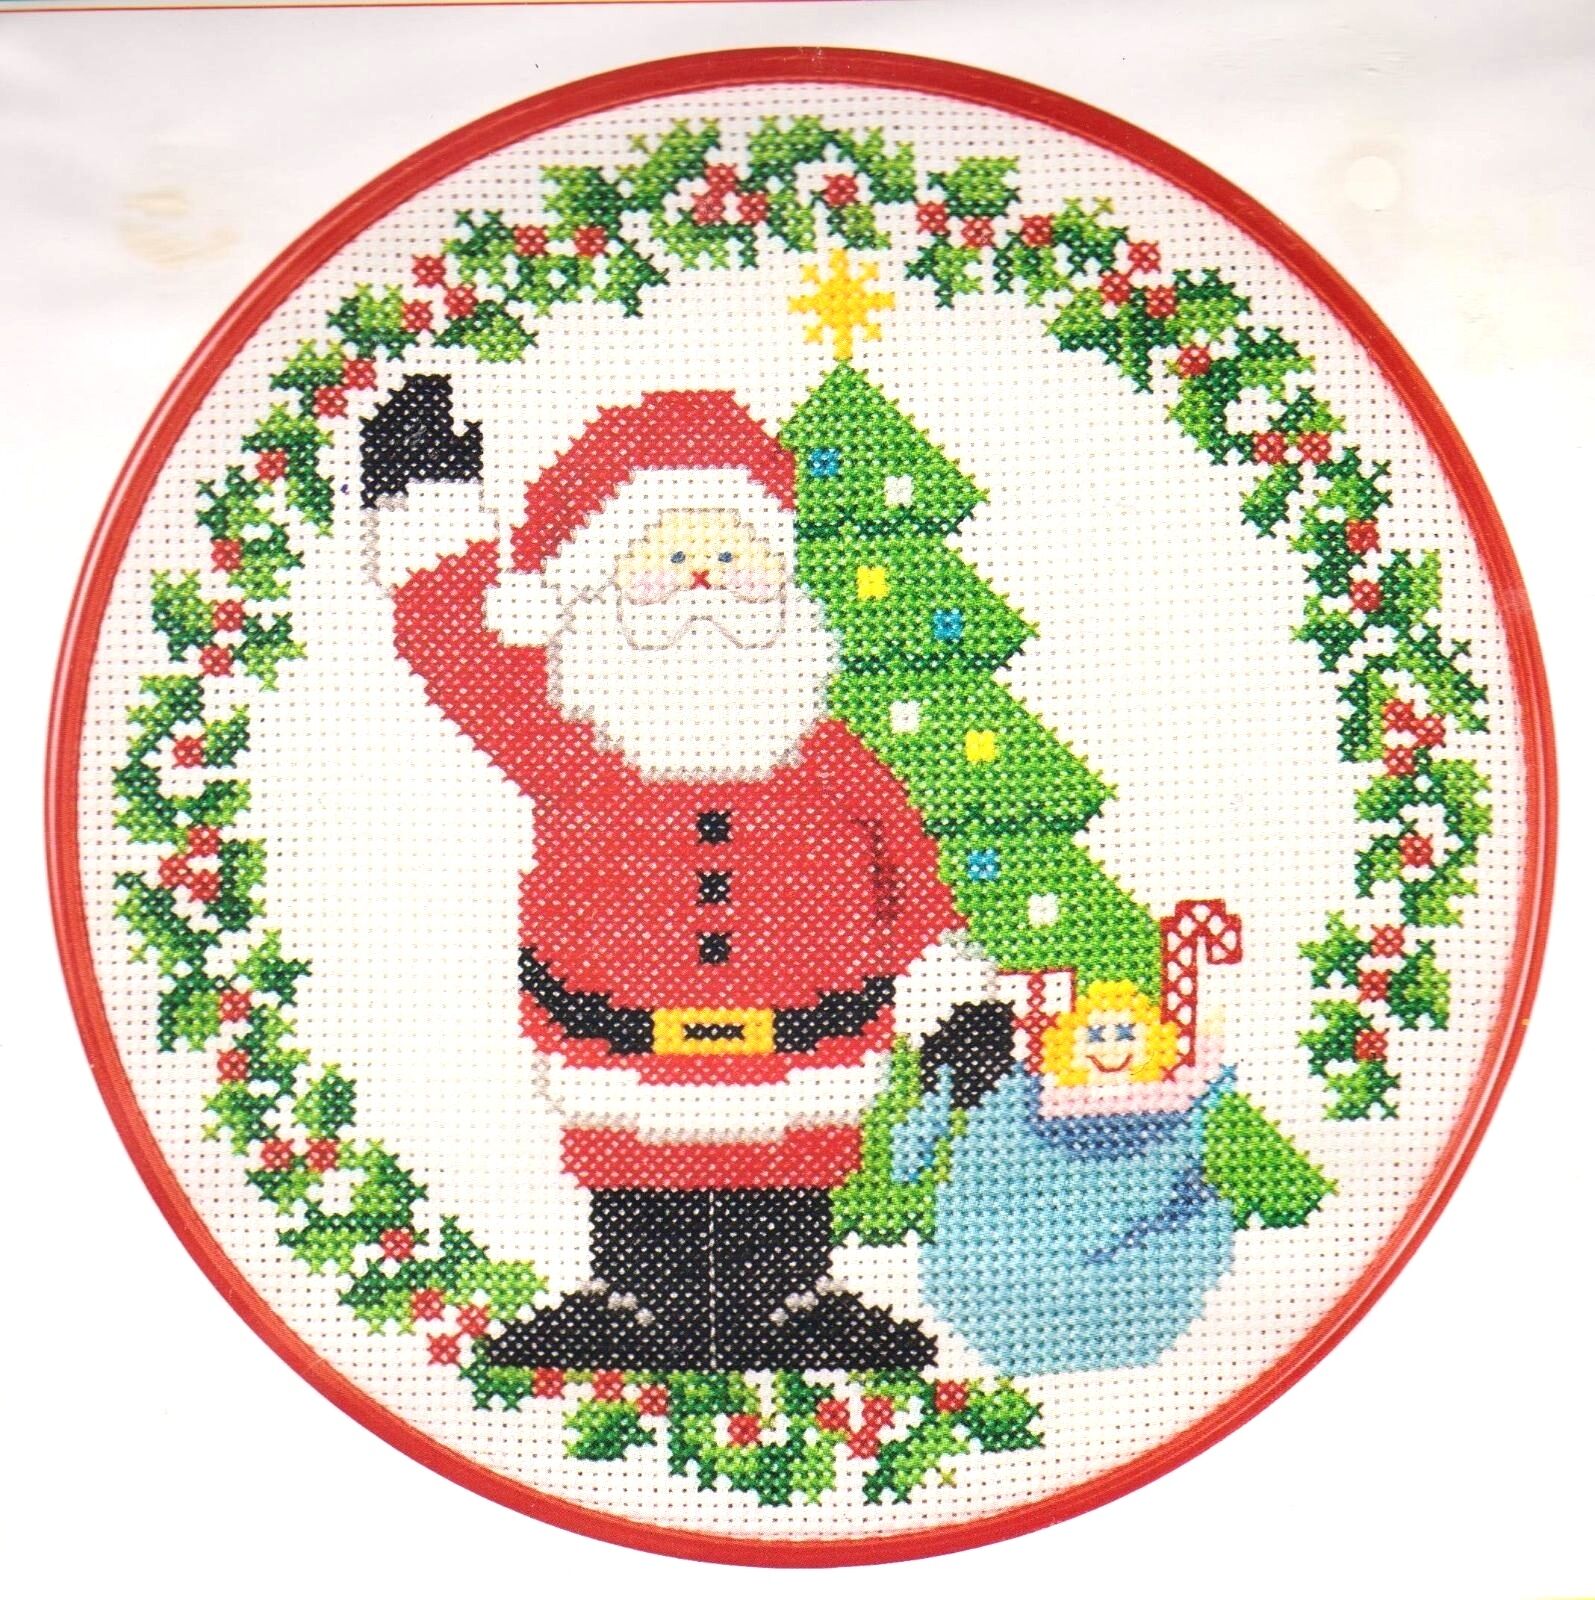 DIY Santa's Bag of Gifts Framed Counted Cross Stitch Kit